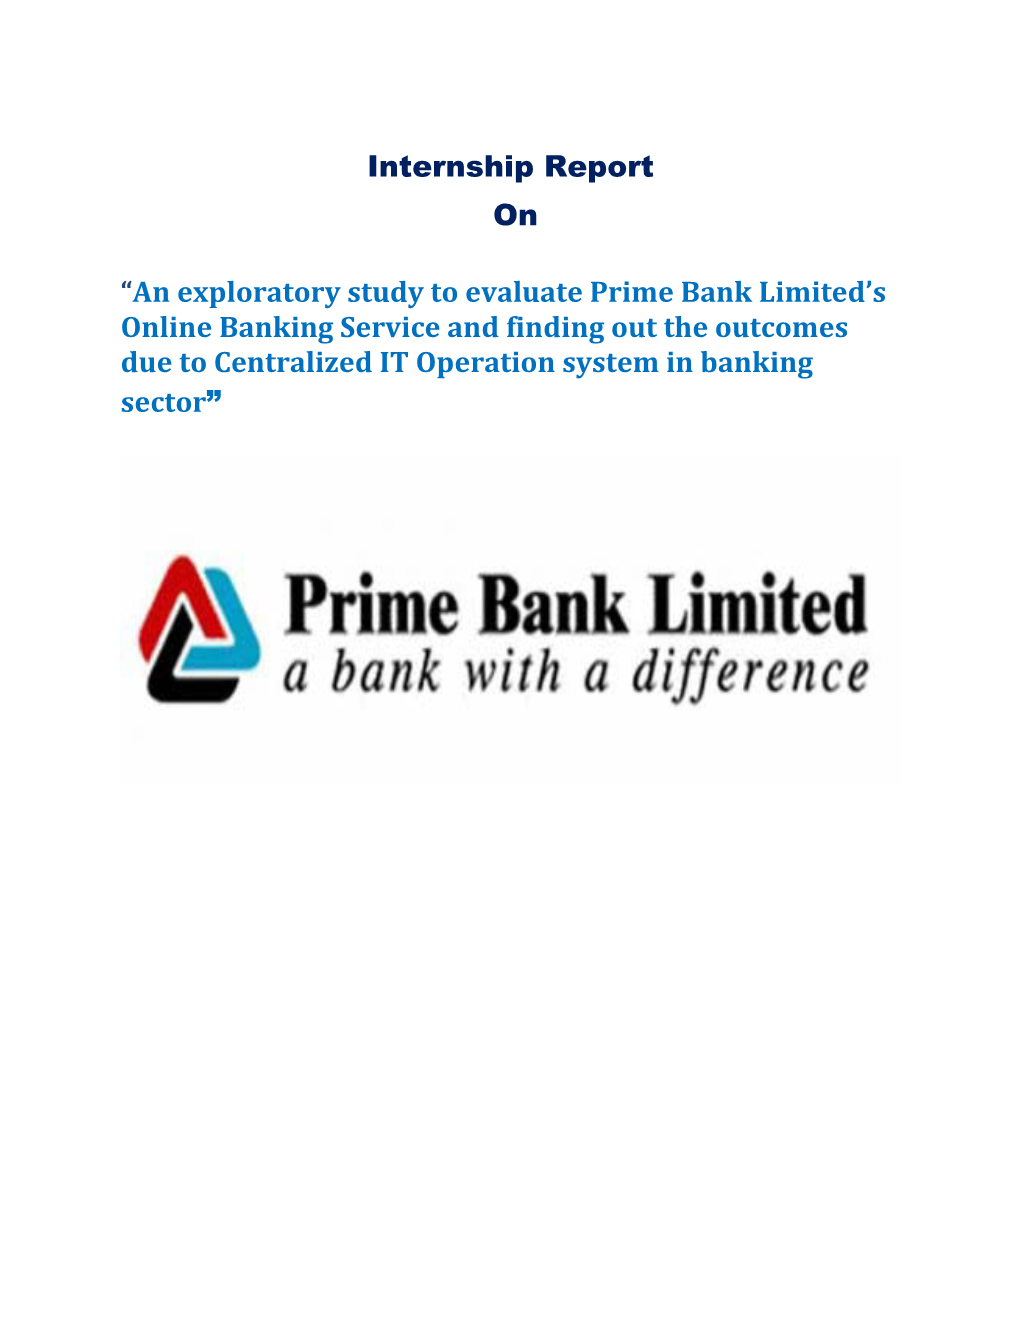 Internship Report on “An Exploratory Study to Evaluate Prime Bank